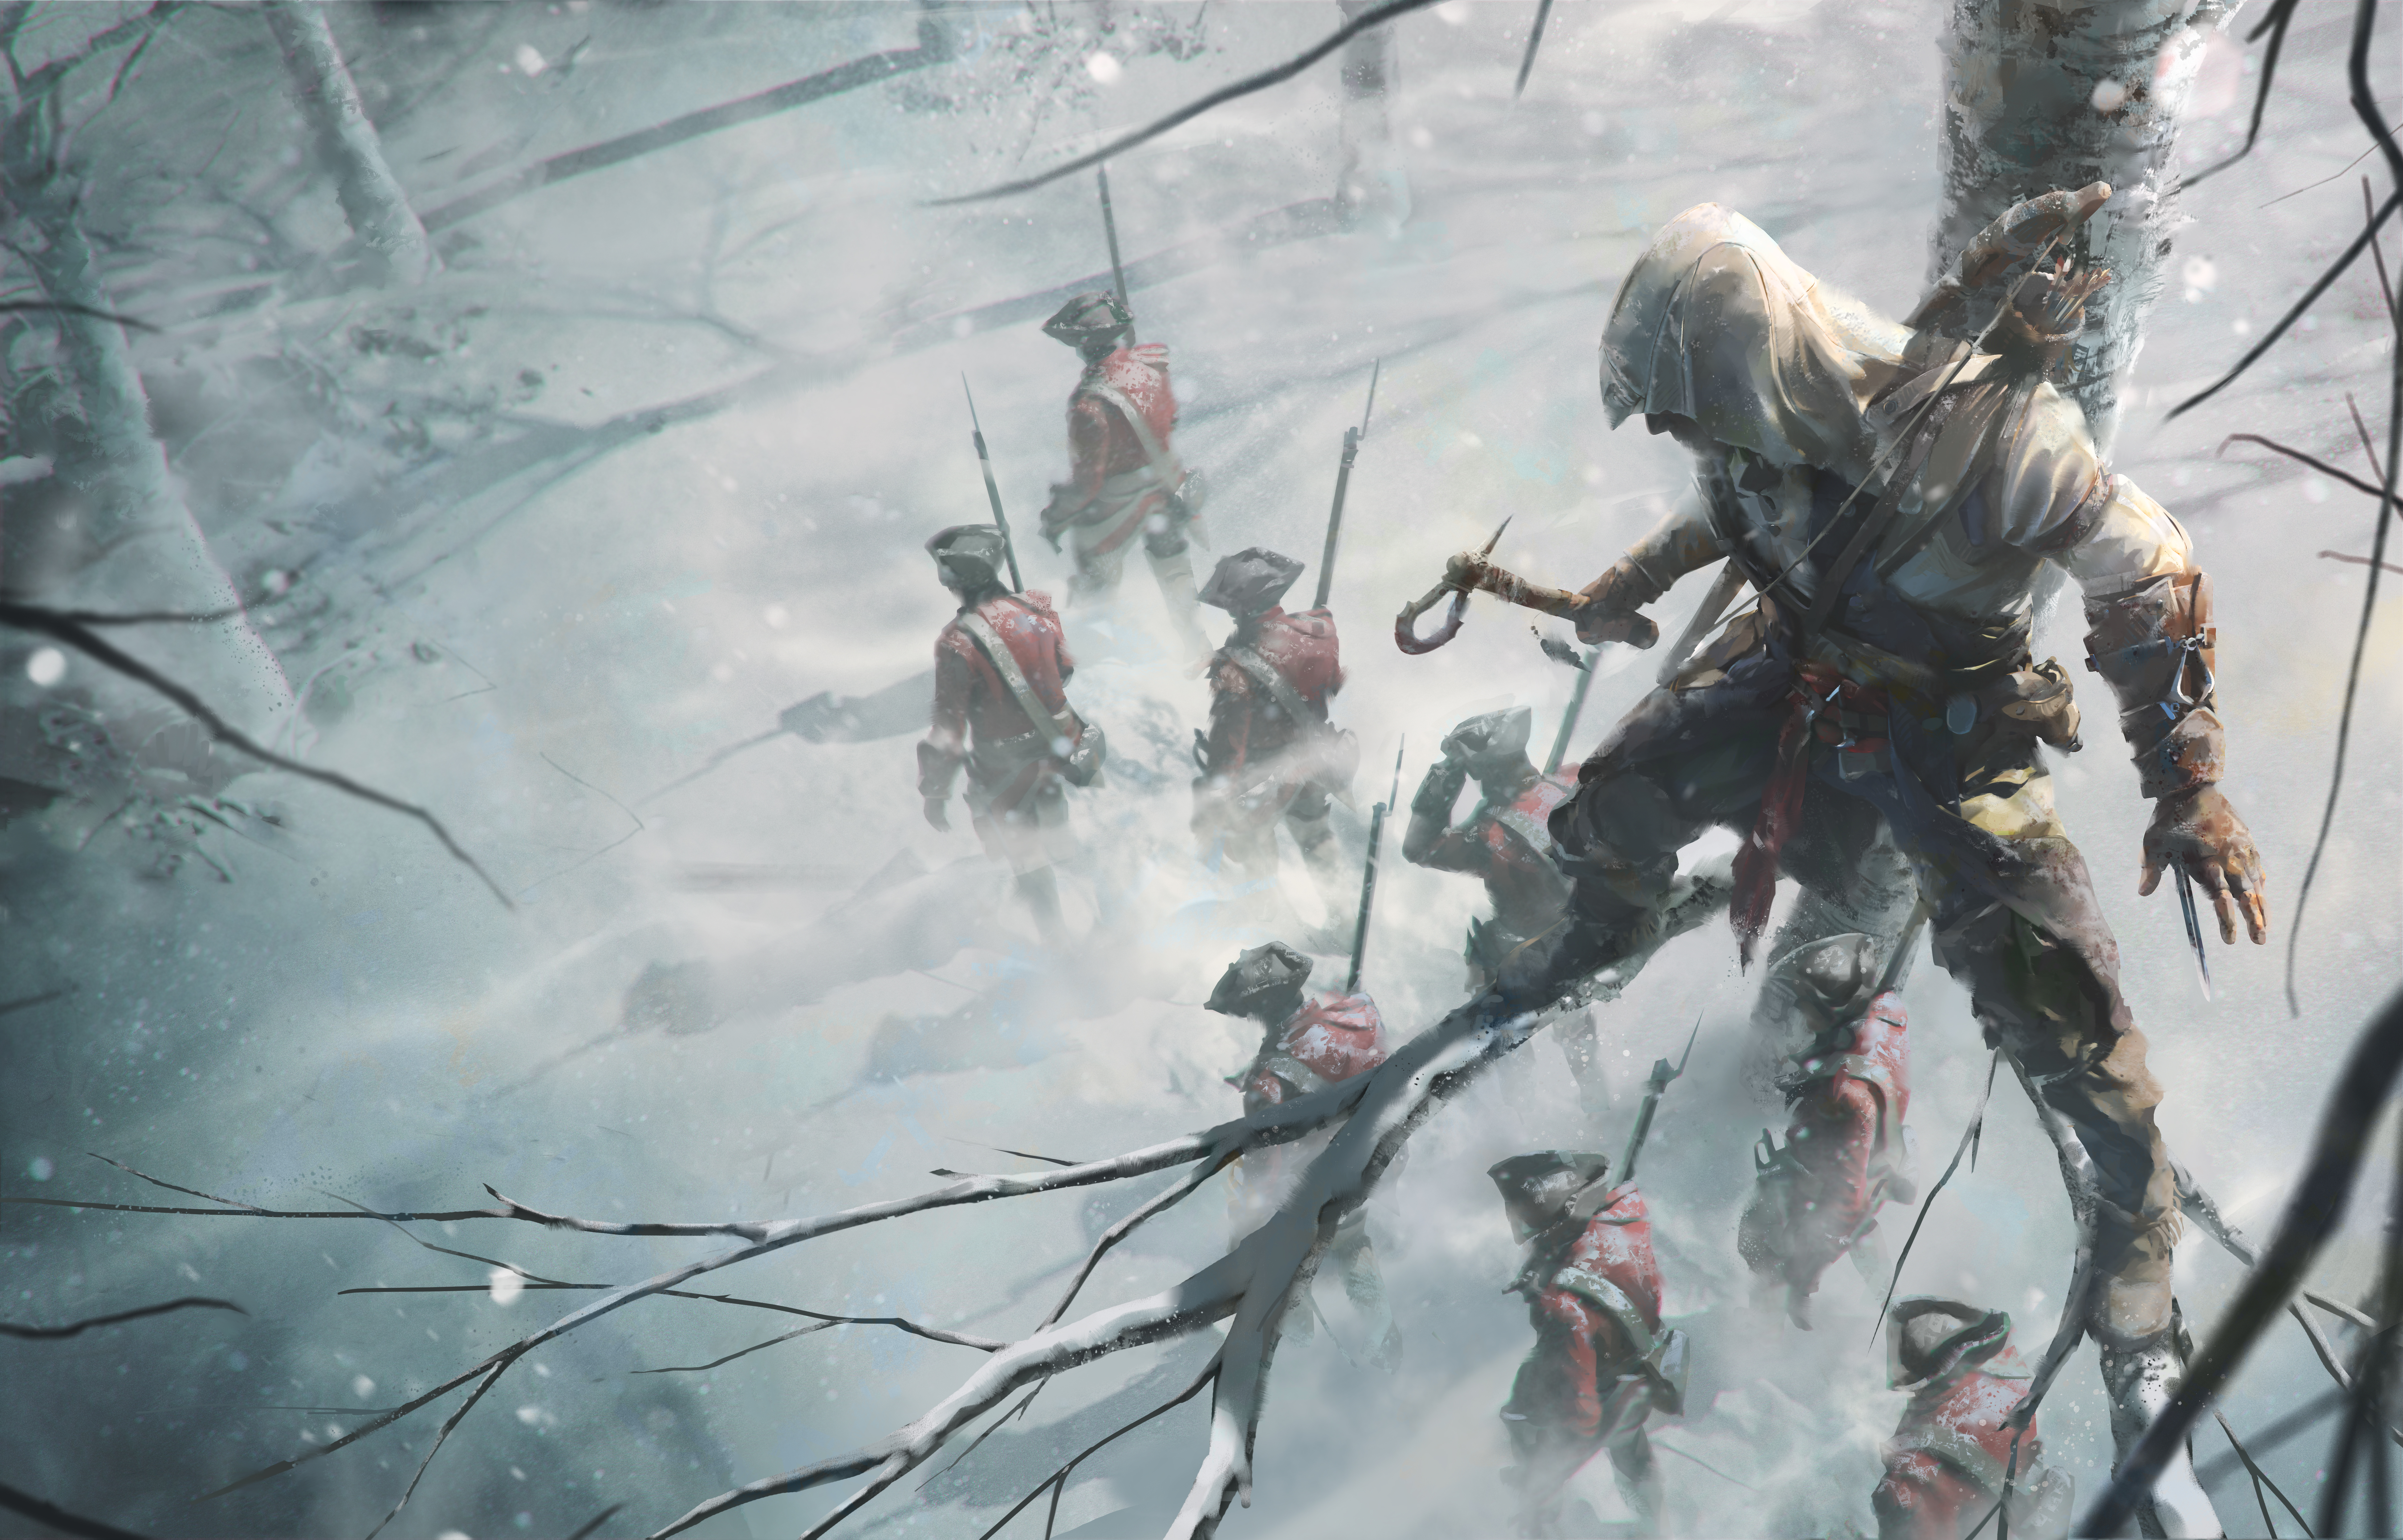 assassin's creed, video game, assassin's creed iii, connor (assassin's creed), soldier, warrior